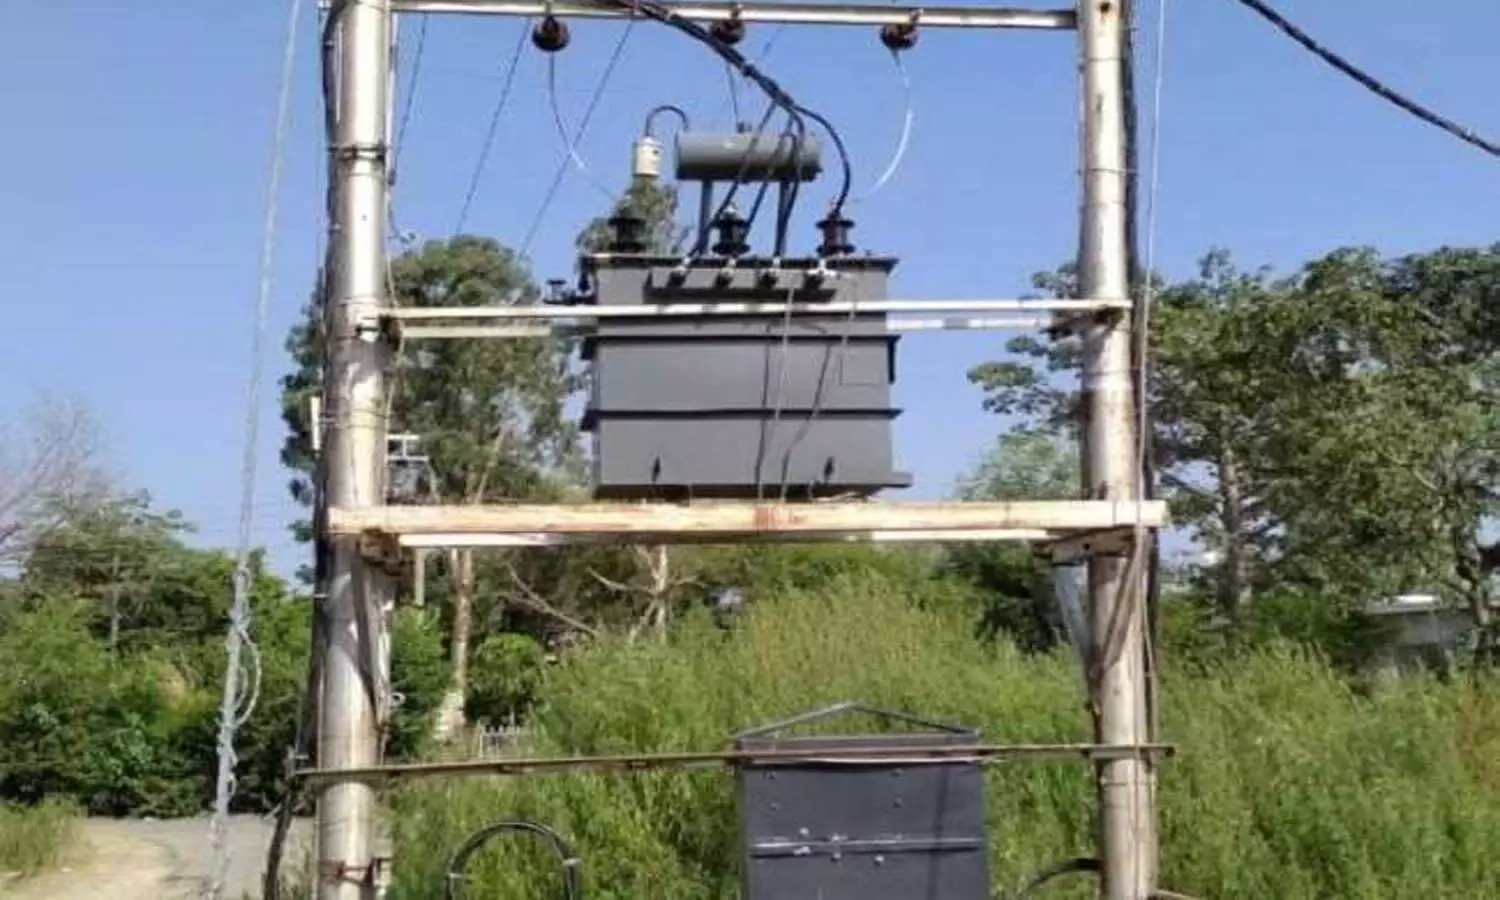 Oil worth one crore rupees stolen from 300 transformers in Banda: Photo